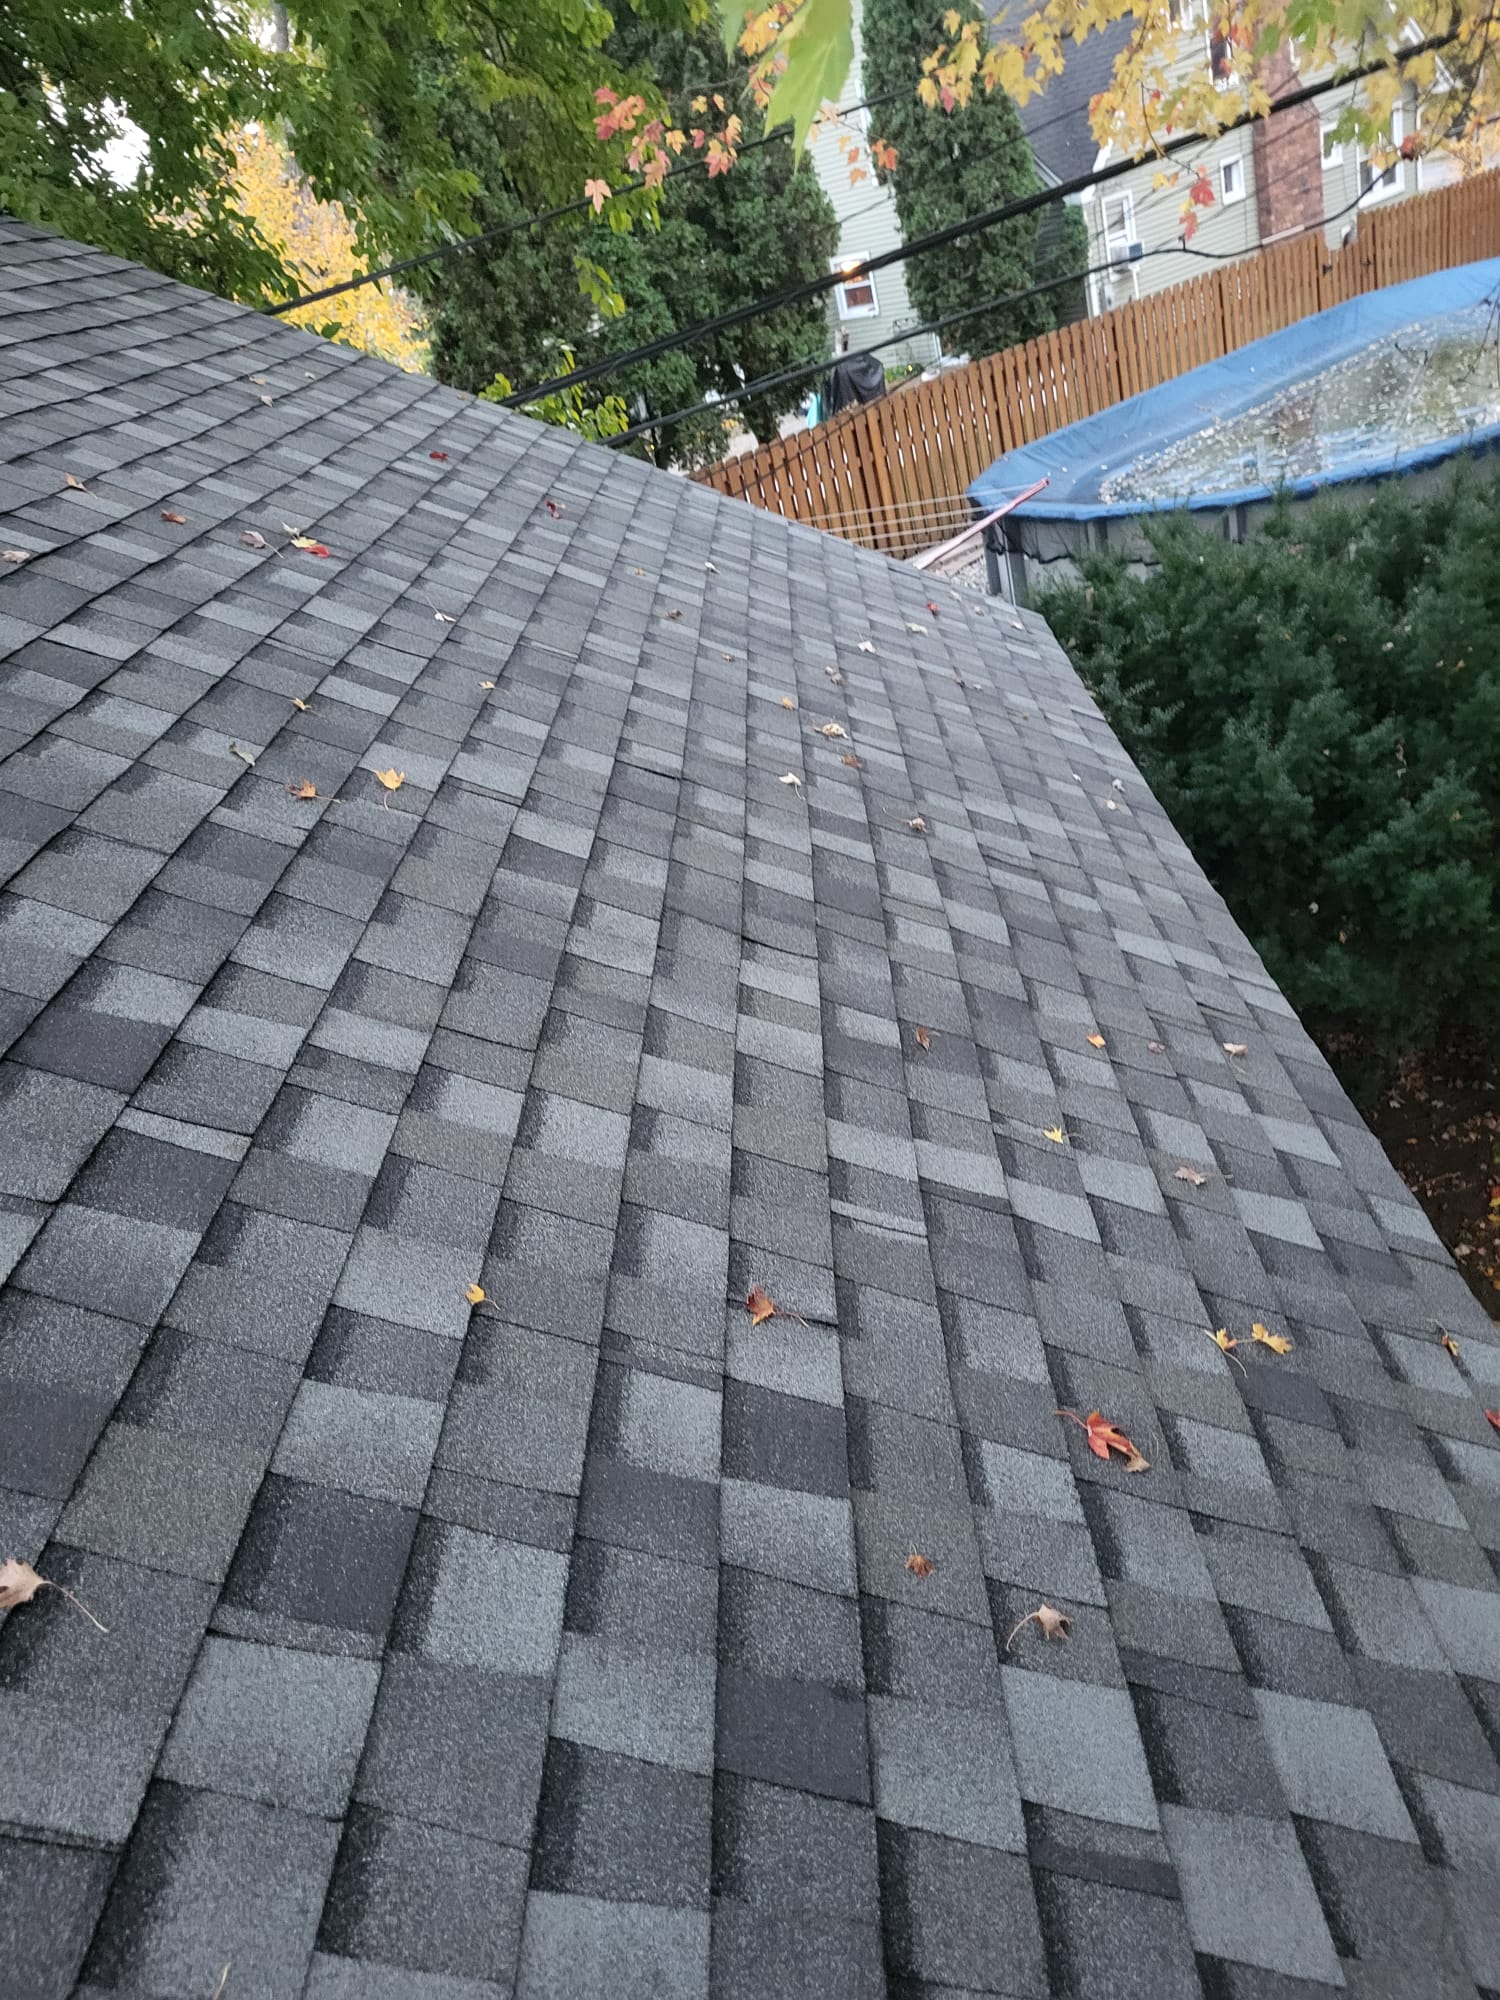 Oakland County Garage Roof Replacement